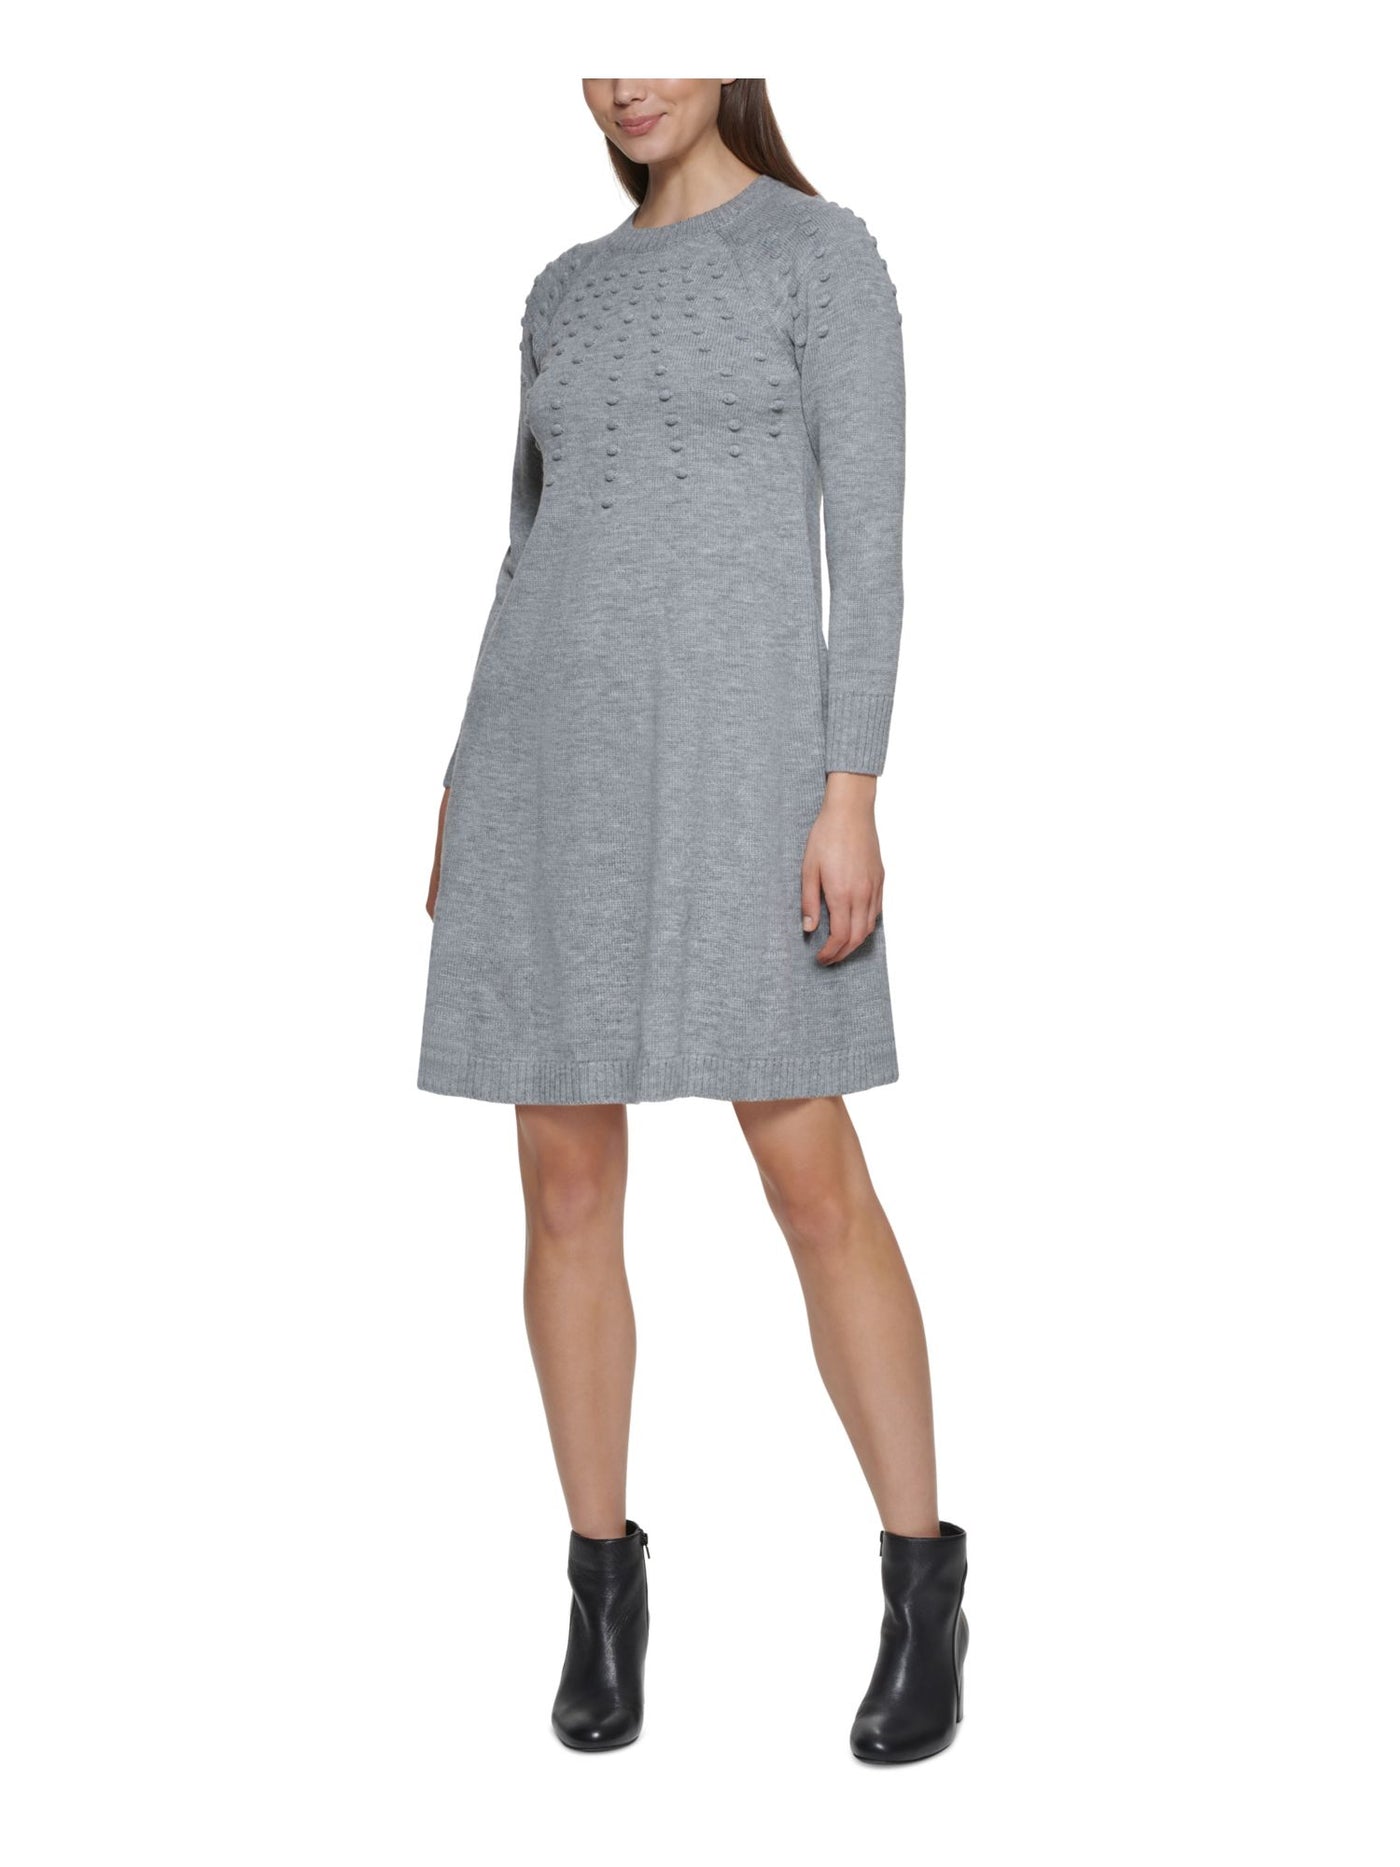 JESSICA HOWARD Womens Gray Textured Ribbed Pull Over Heather Long Sleeve Crew Neck Above The Knee Shift Dress Petites PL